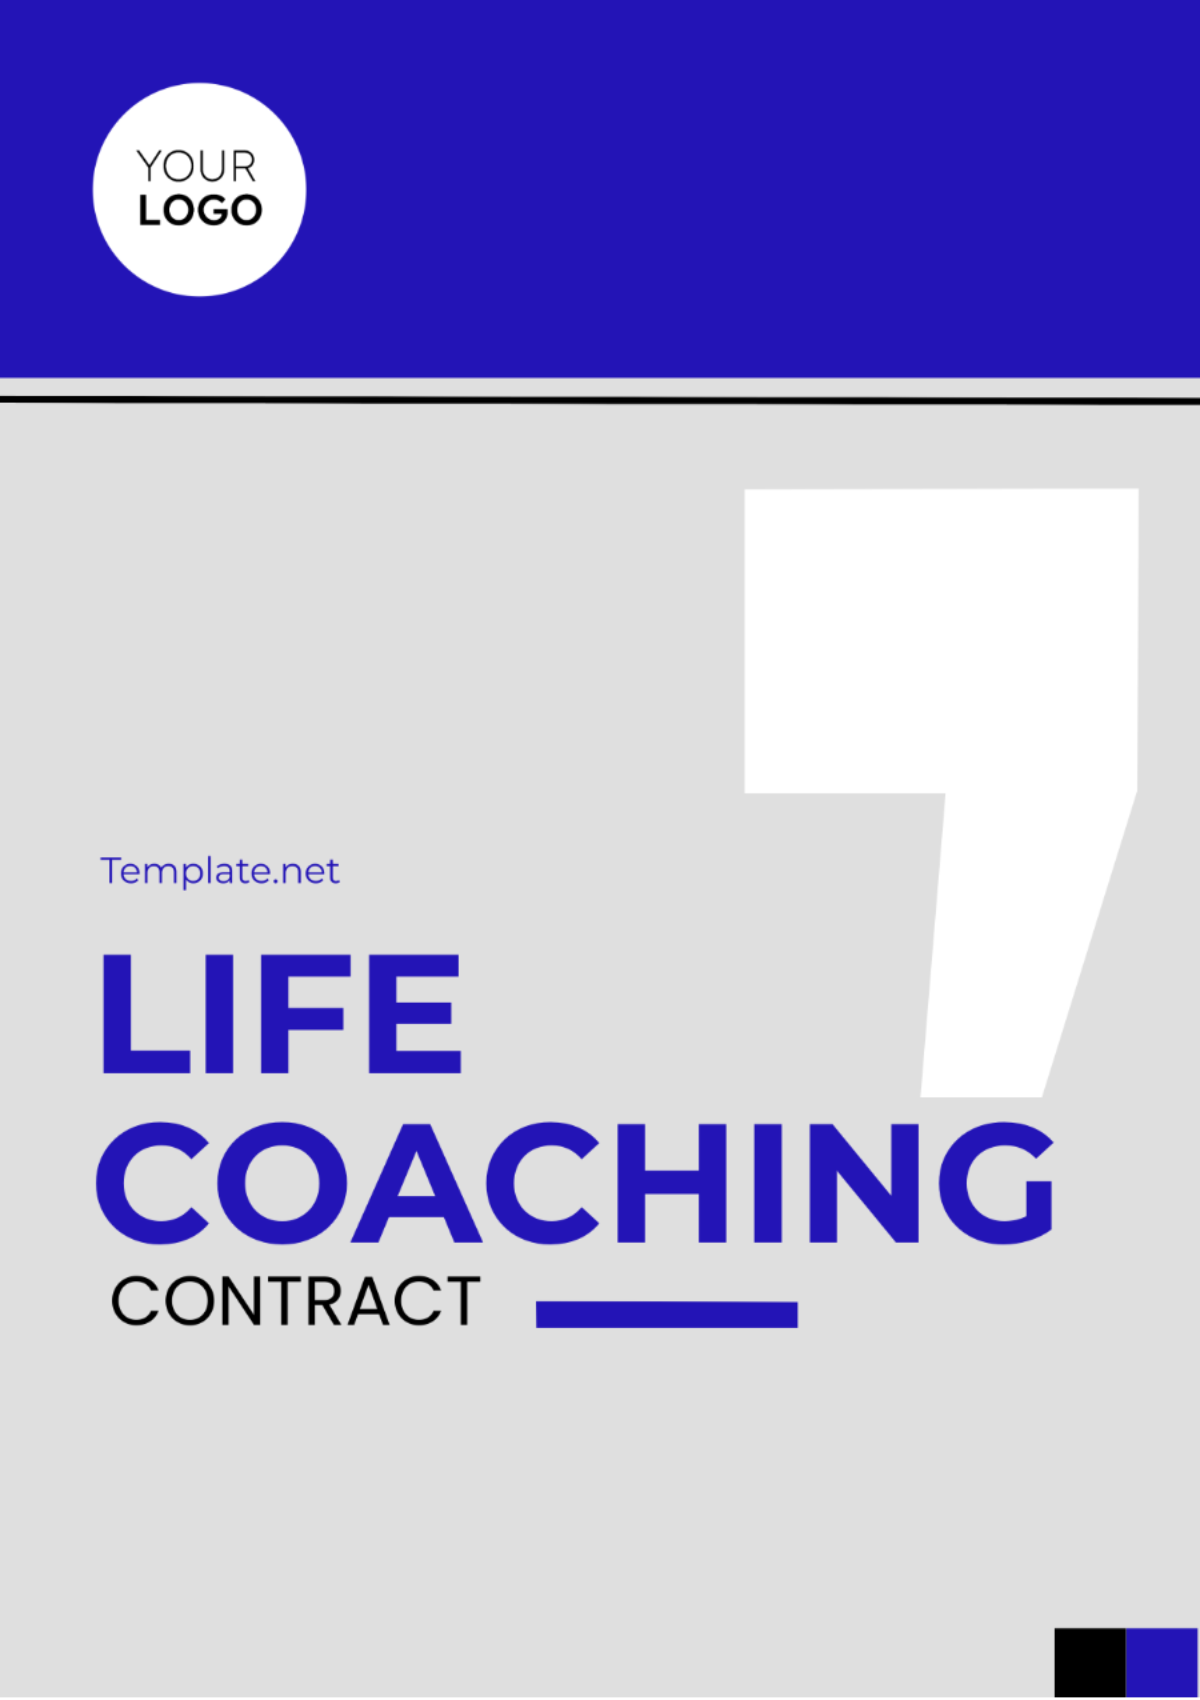 Life Coaching Contract Template